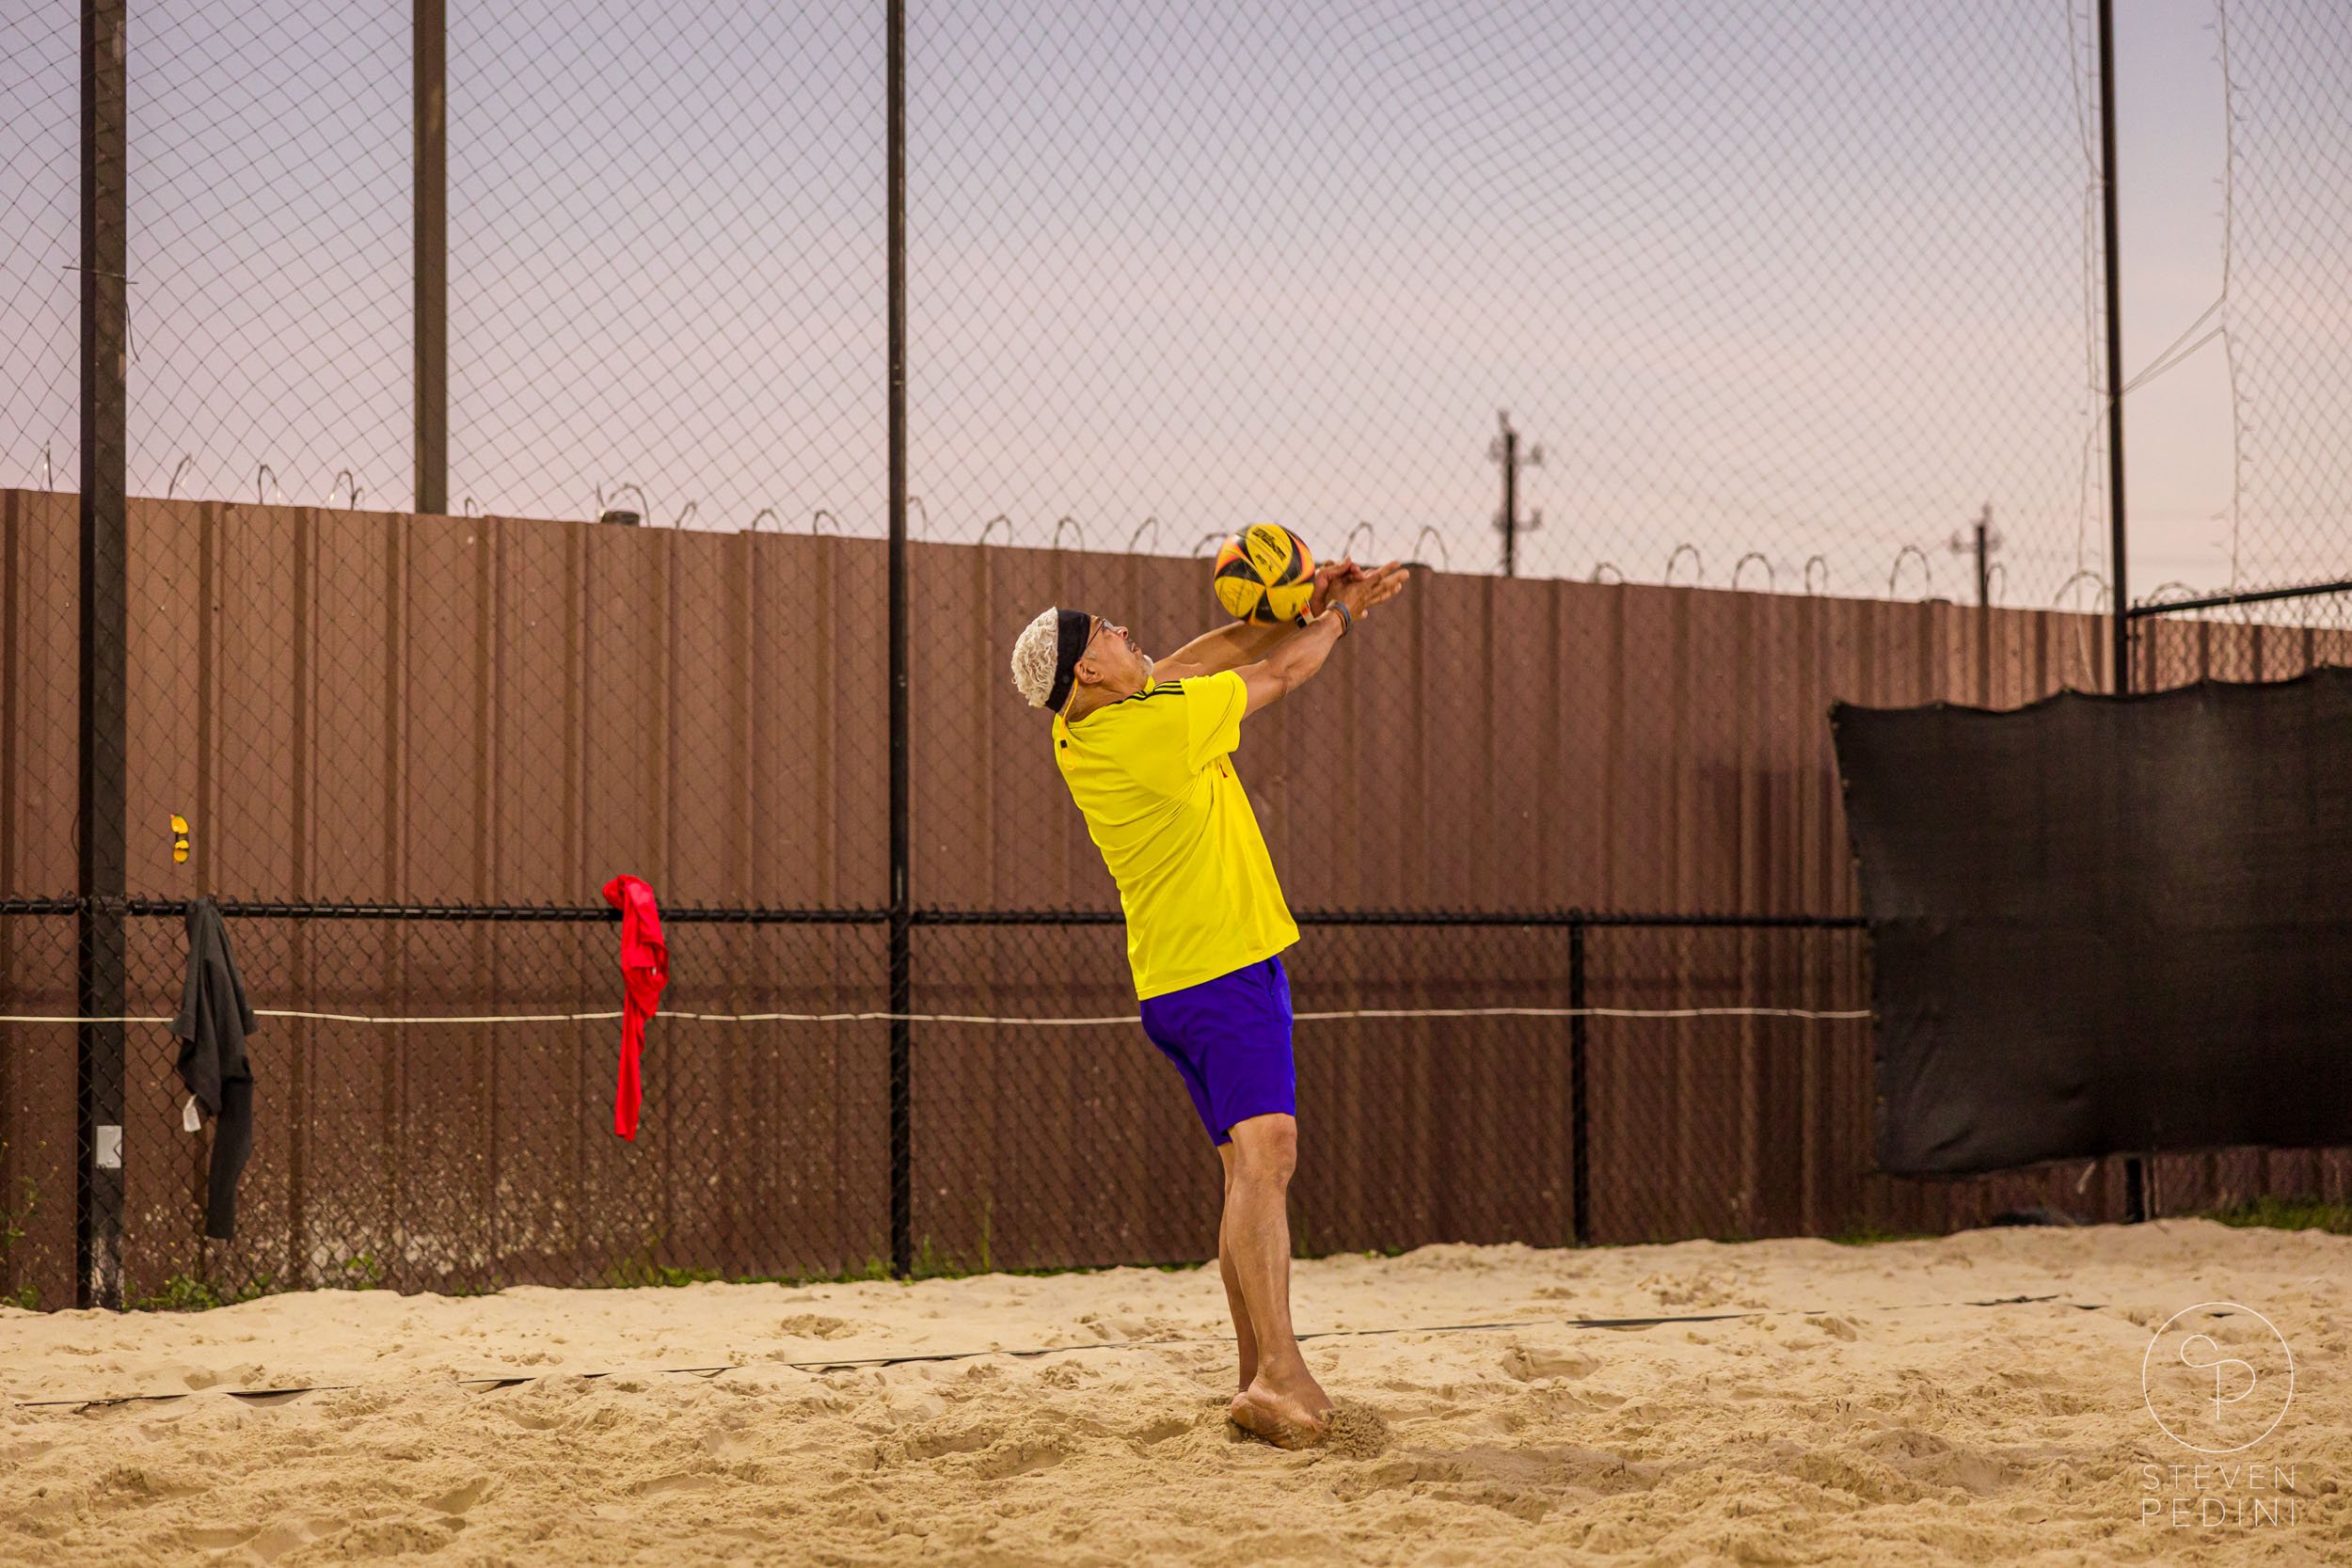 Steven Pedini Photography - Bumpy Pickle - Sand Volleyball - Houston TX - World Cup of Volleyball - 00288.jpg